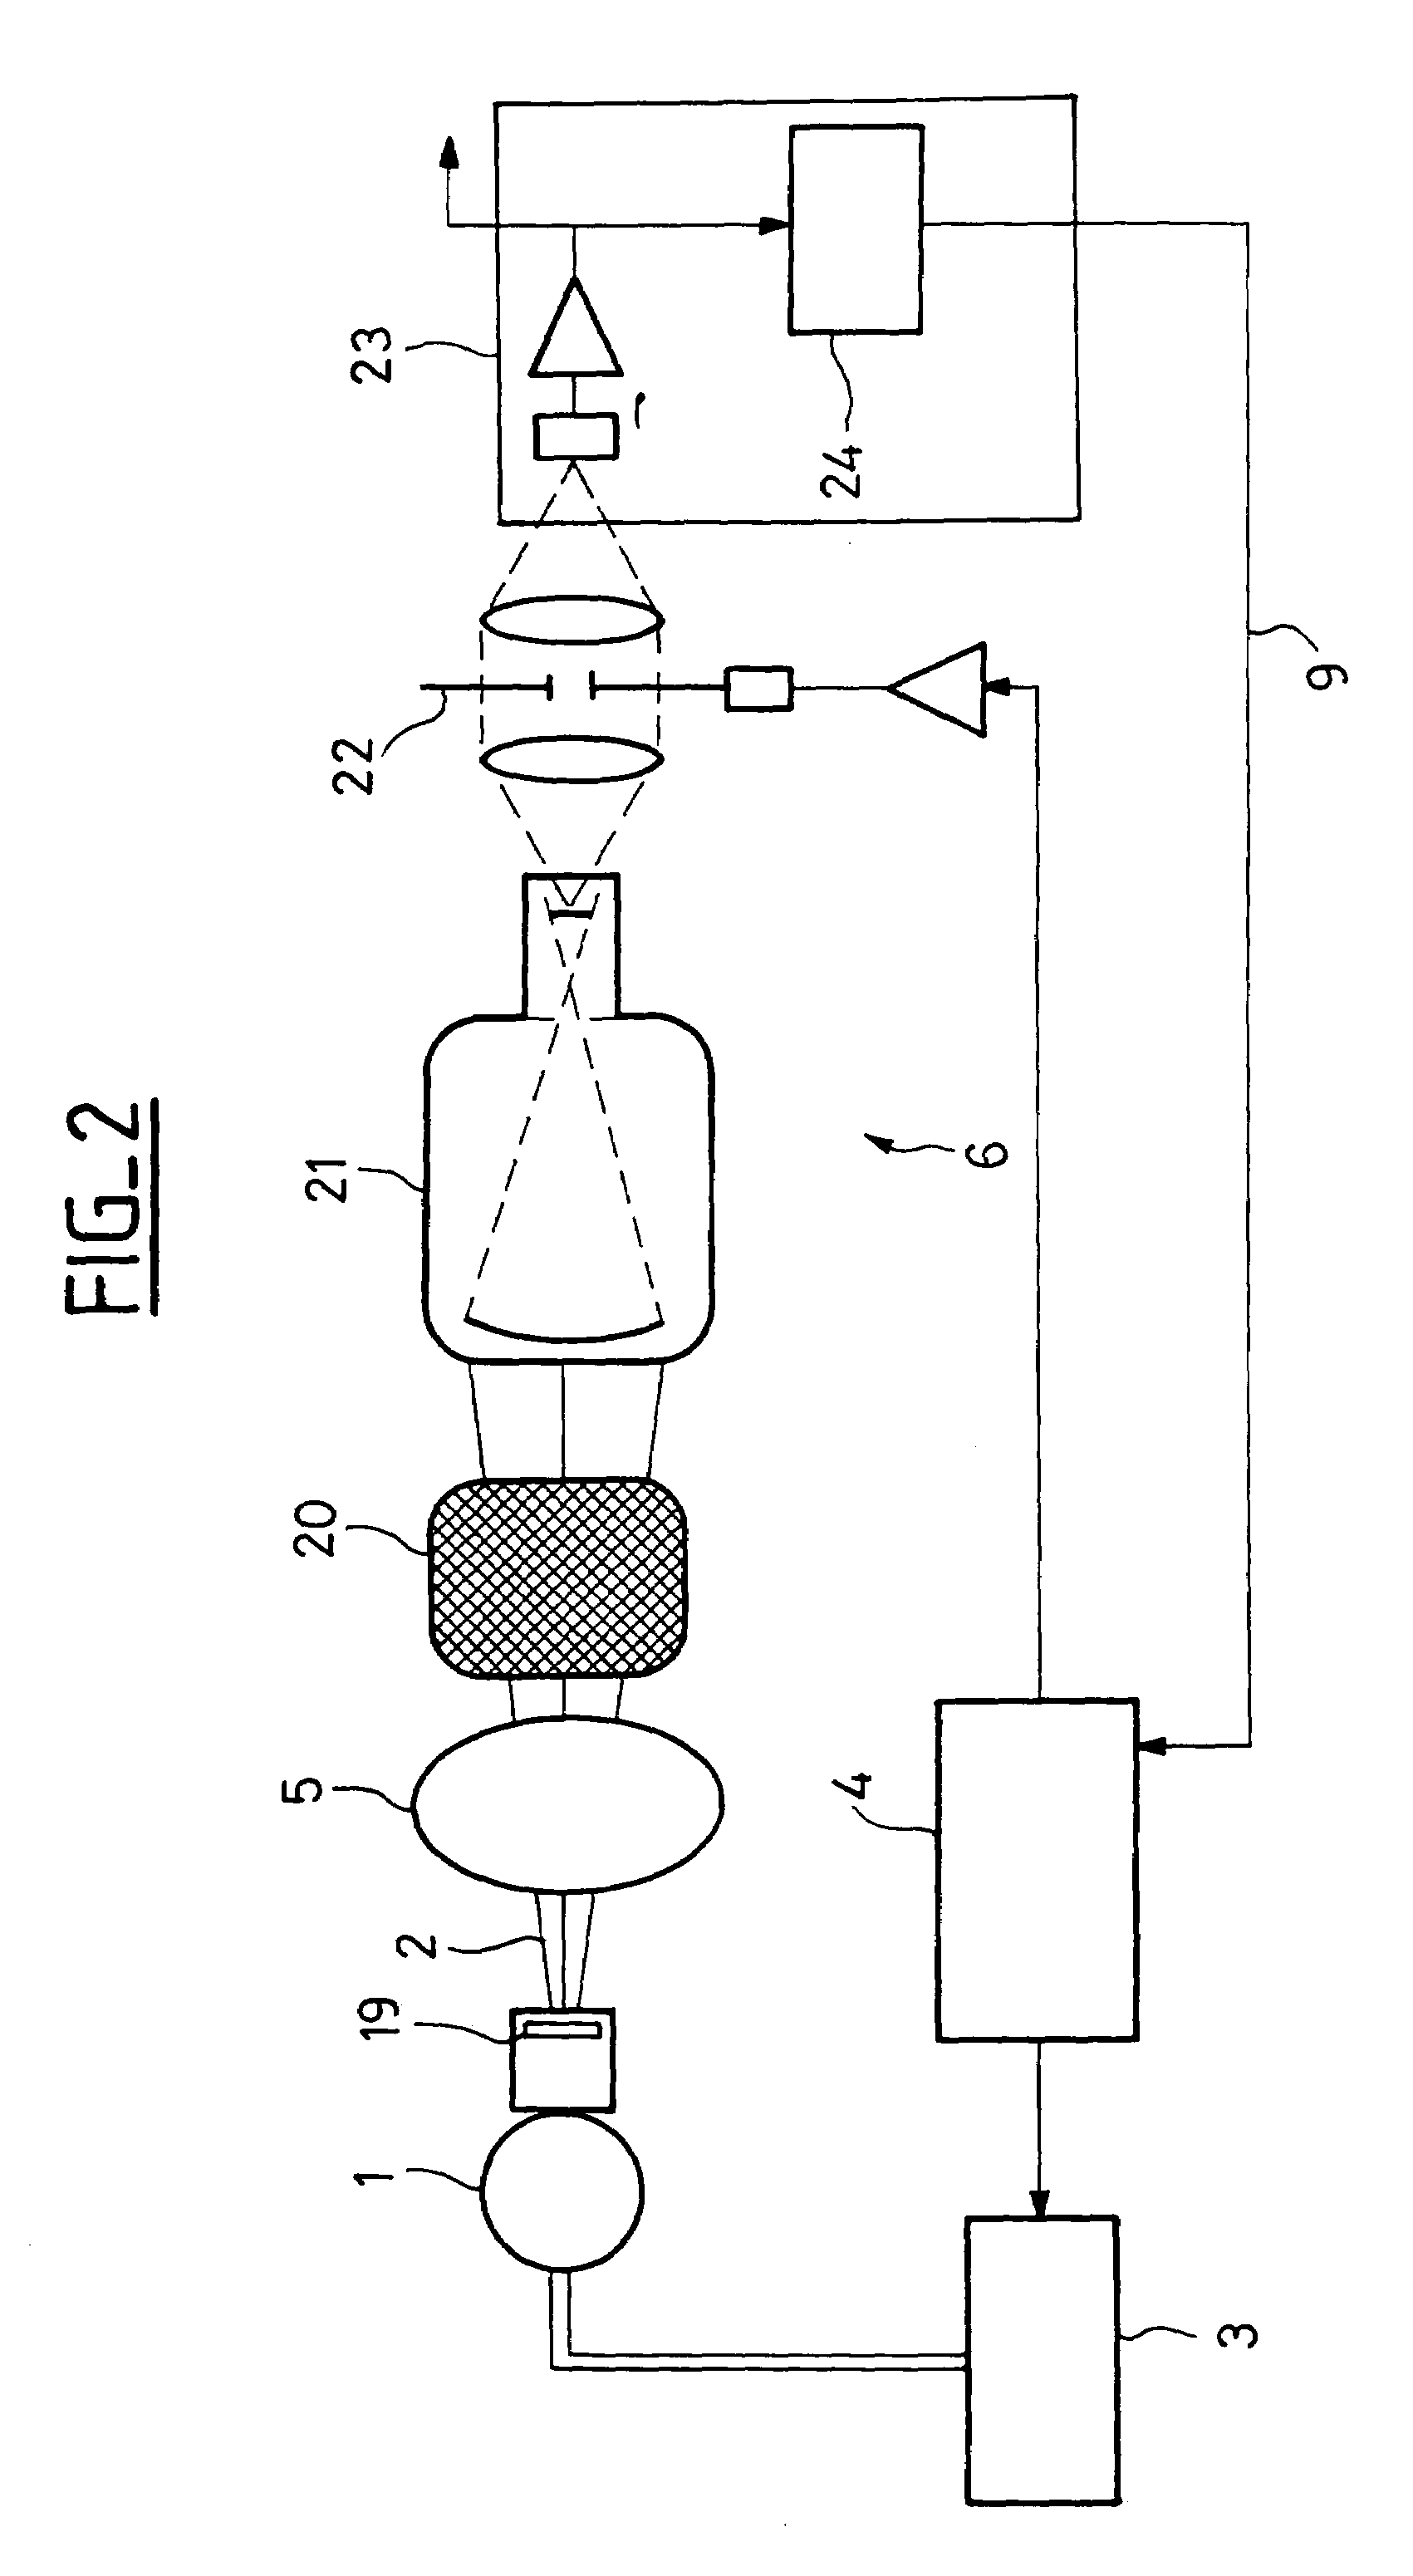 Method and apparatus for control of exposure in radiological imaging systems